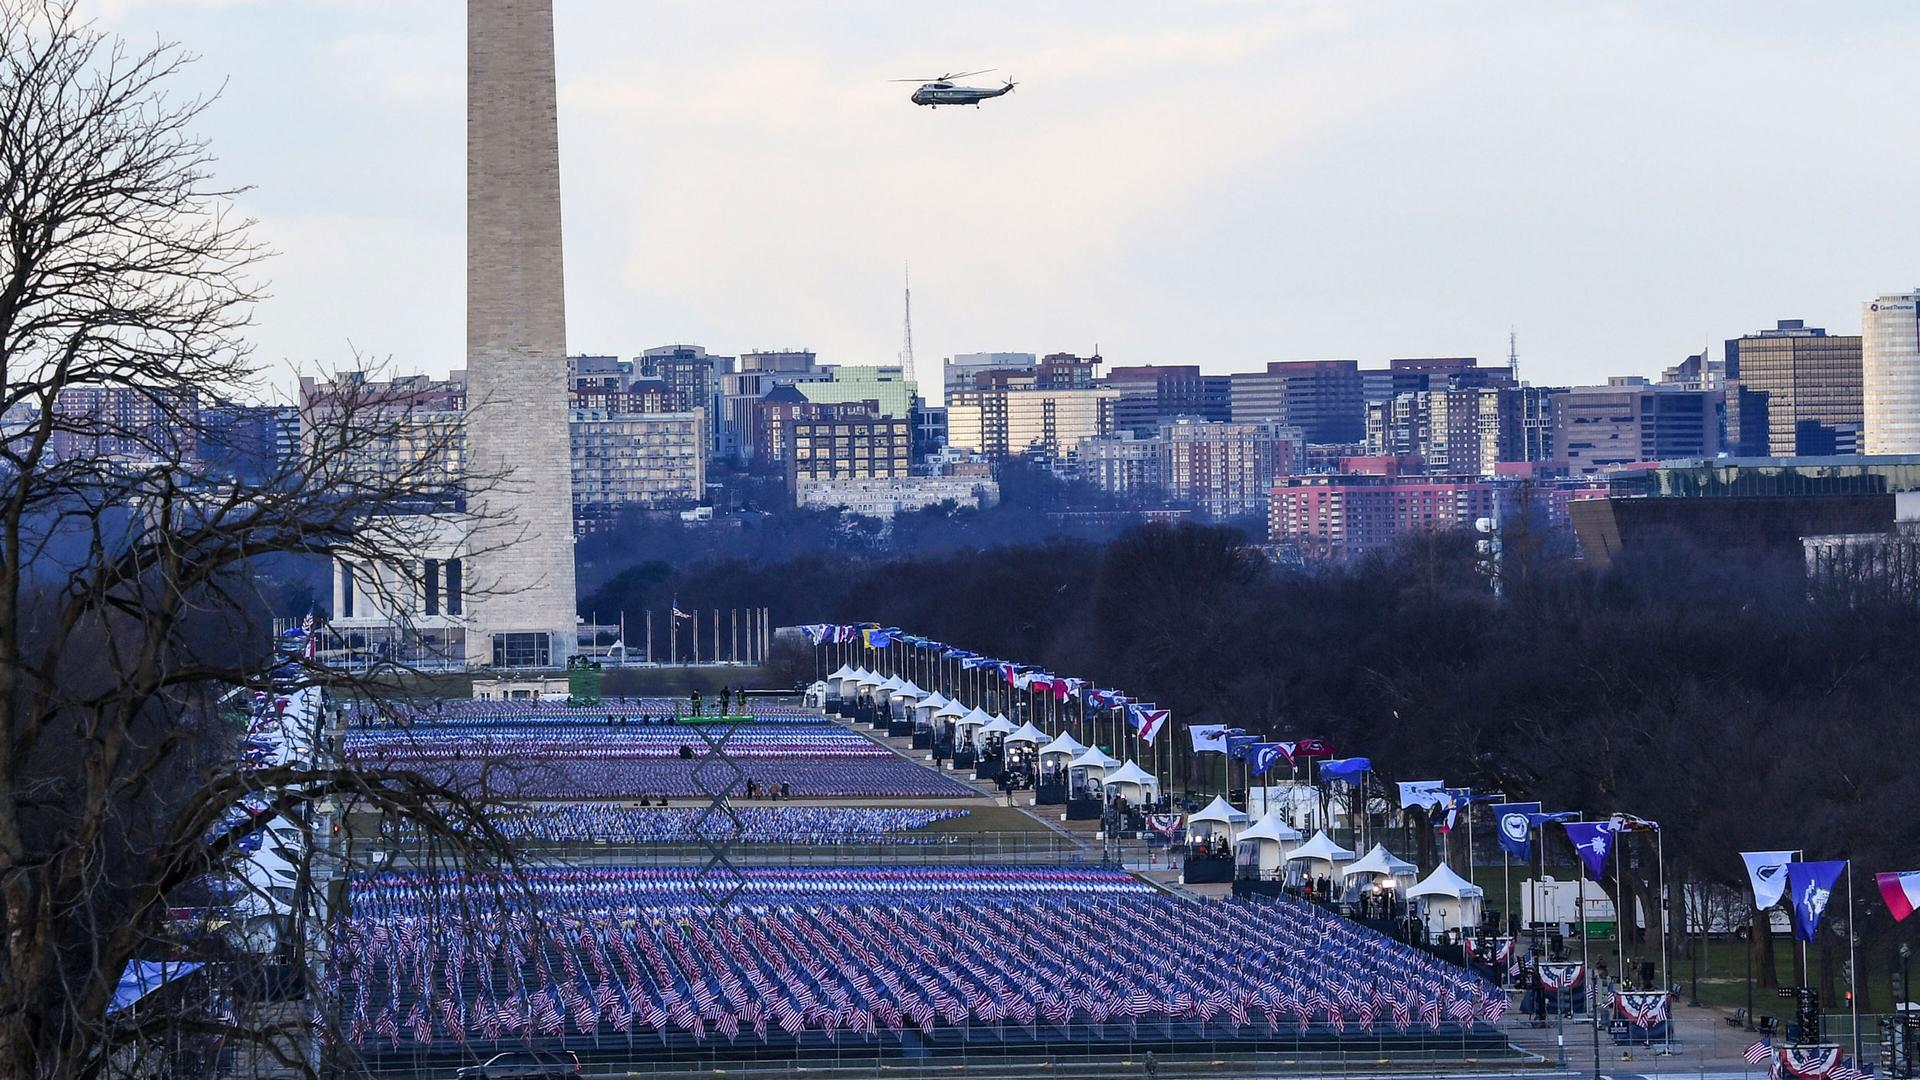 The US National Mall is shown covered in flags with the Washington Monument in the distance and the Marine One helicopter flying past.